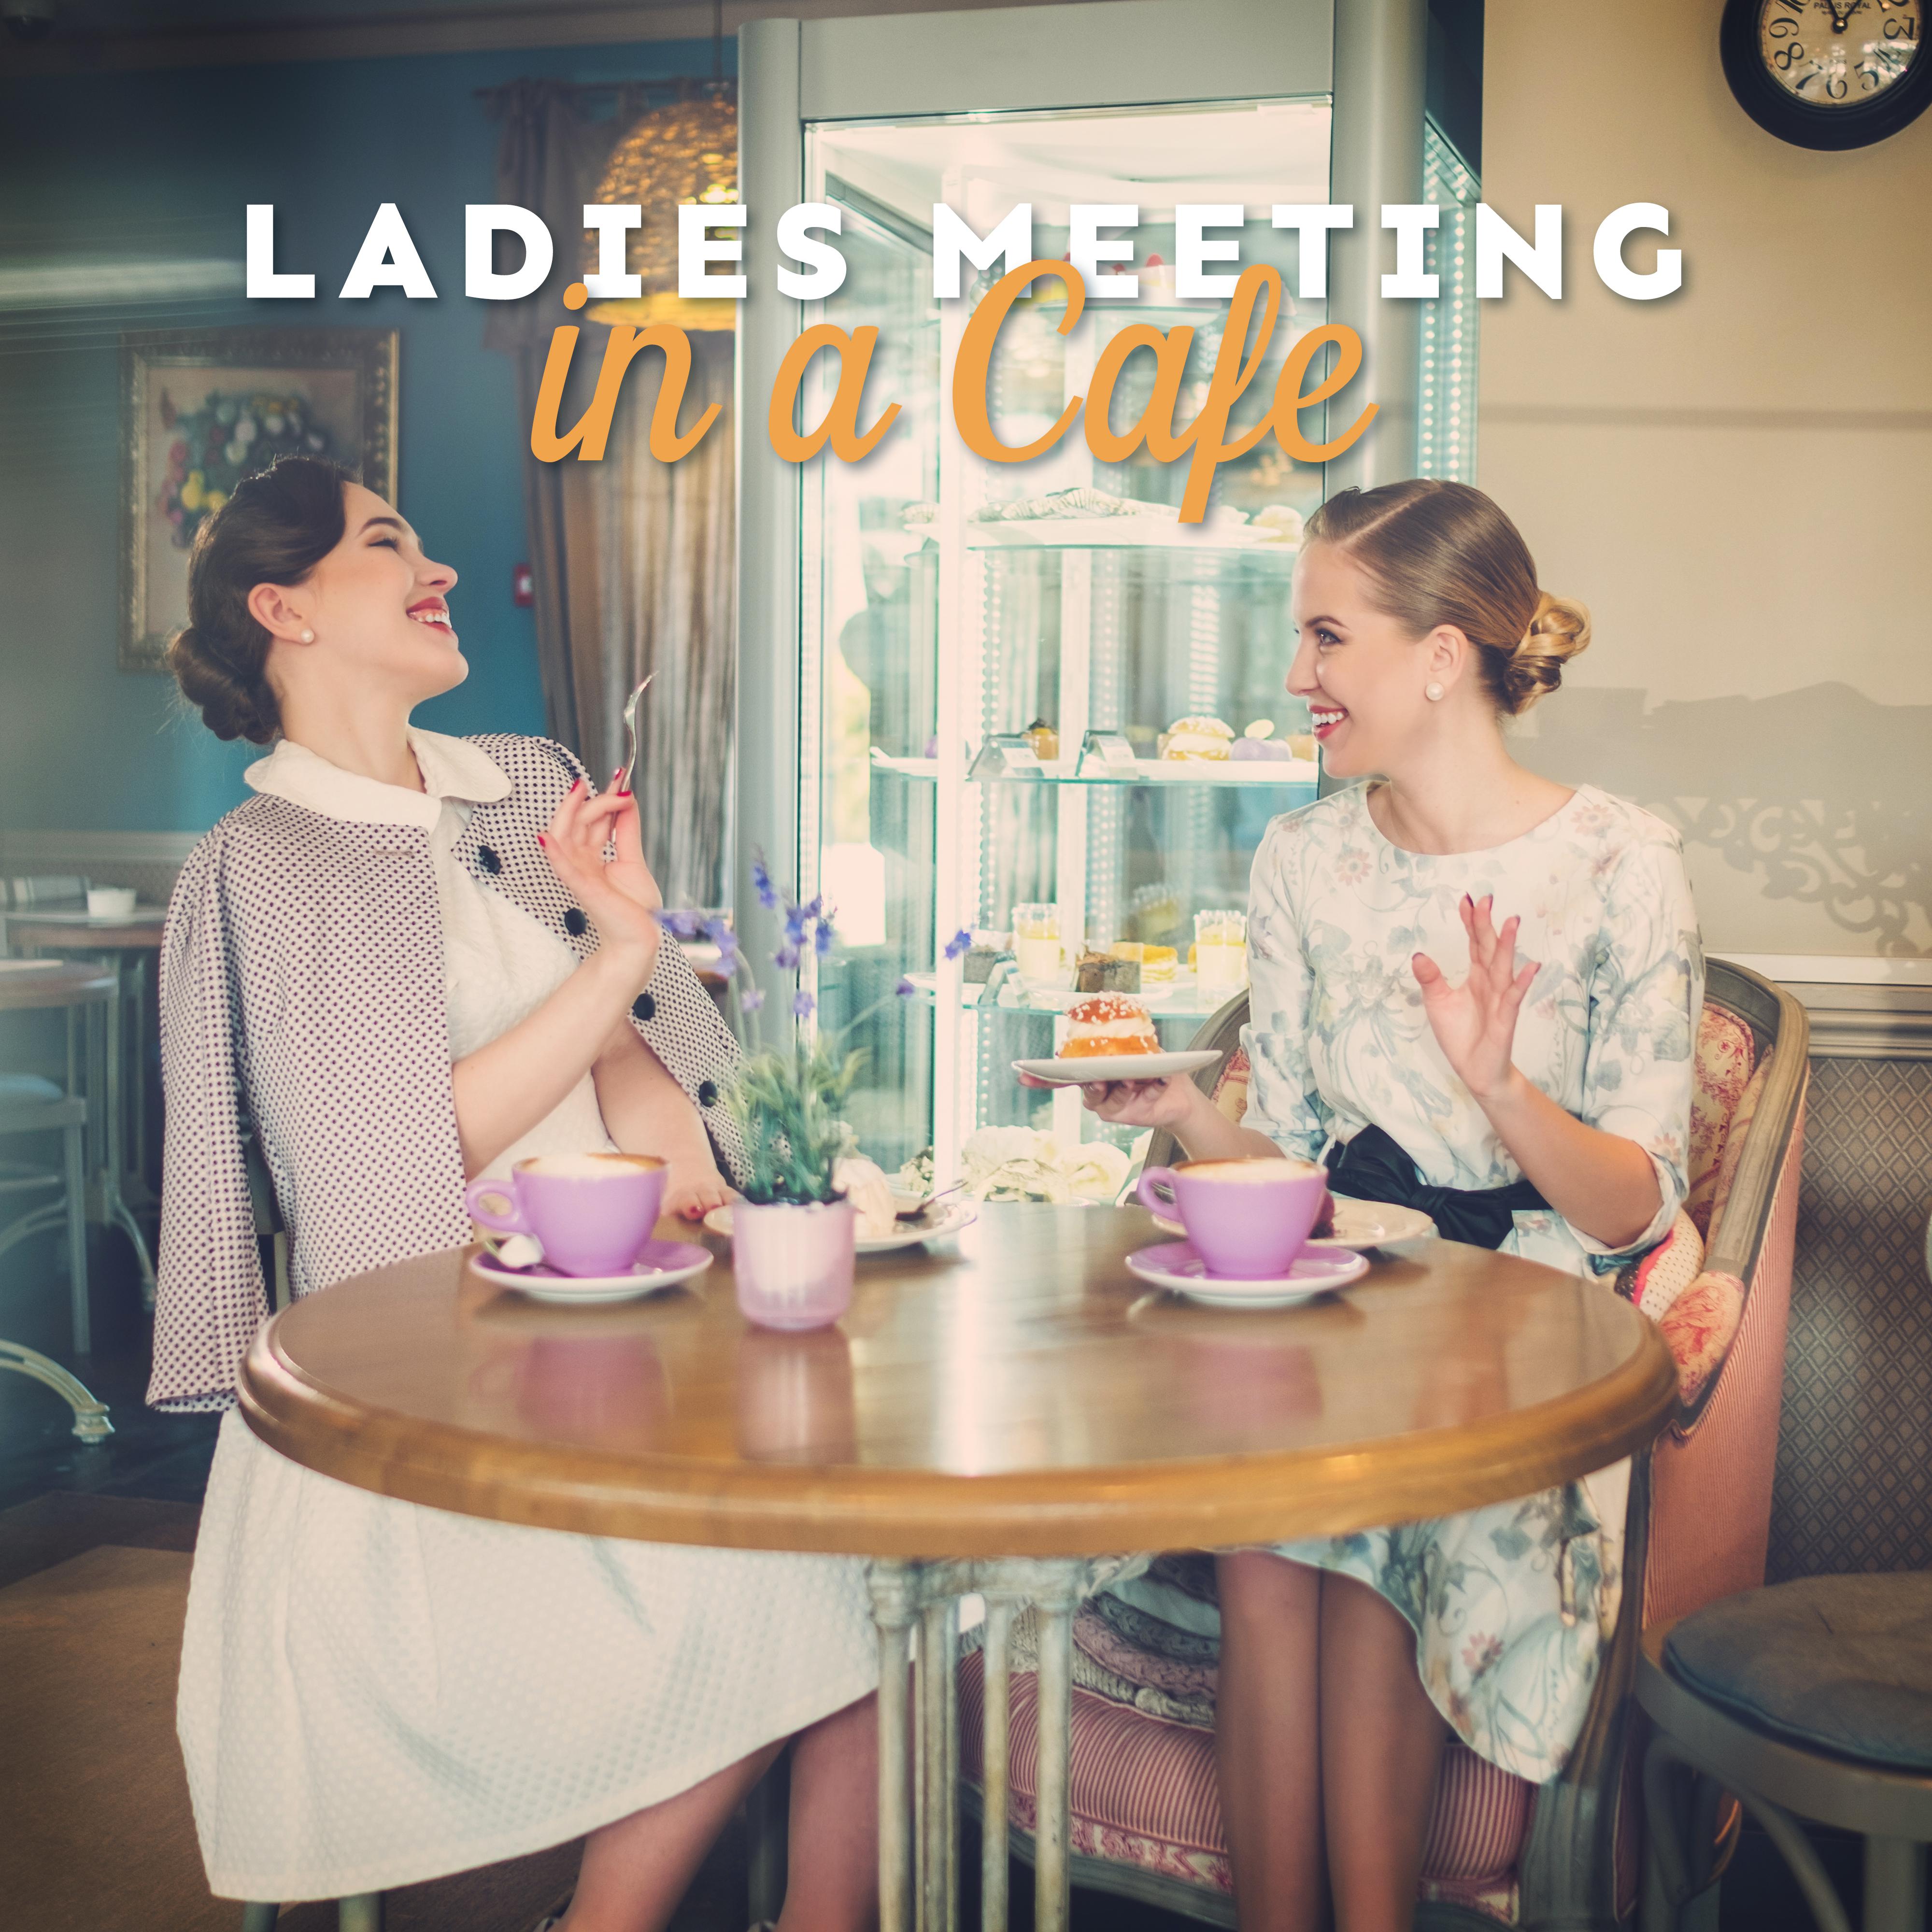 Ladies Meeting in a Cafe: 2019 Most Charming Smooth Jazz Music Mix That Fits Perfectly Into a Coffee Meeting, Vintage Styled Songs with Happy Melodies